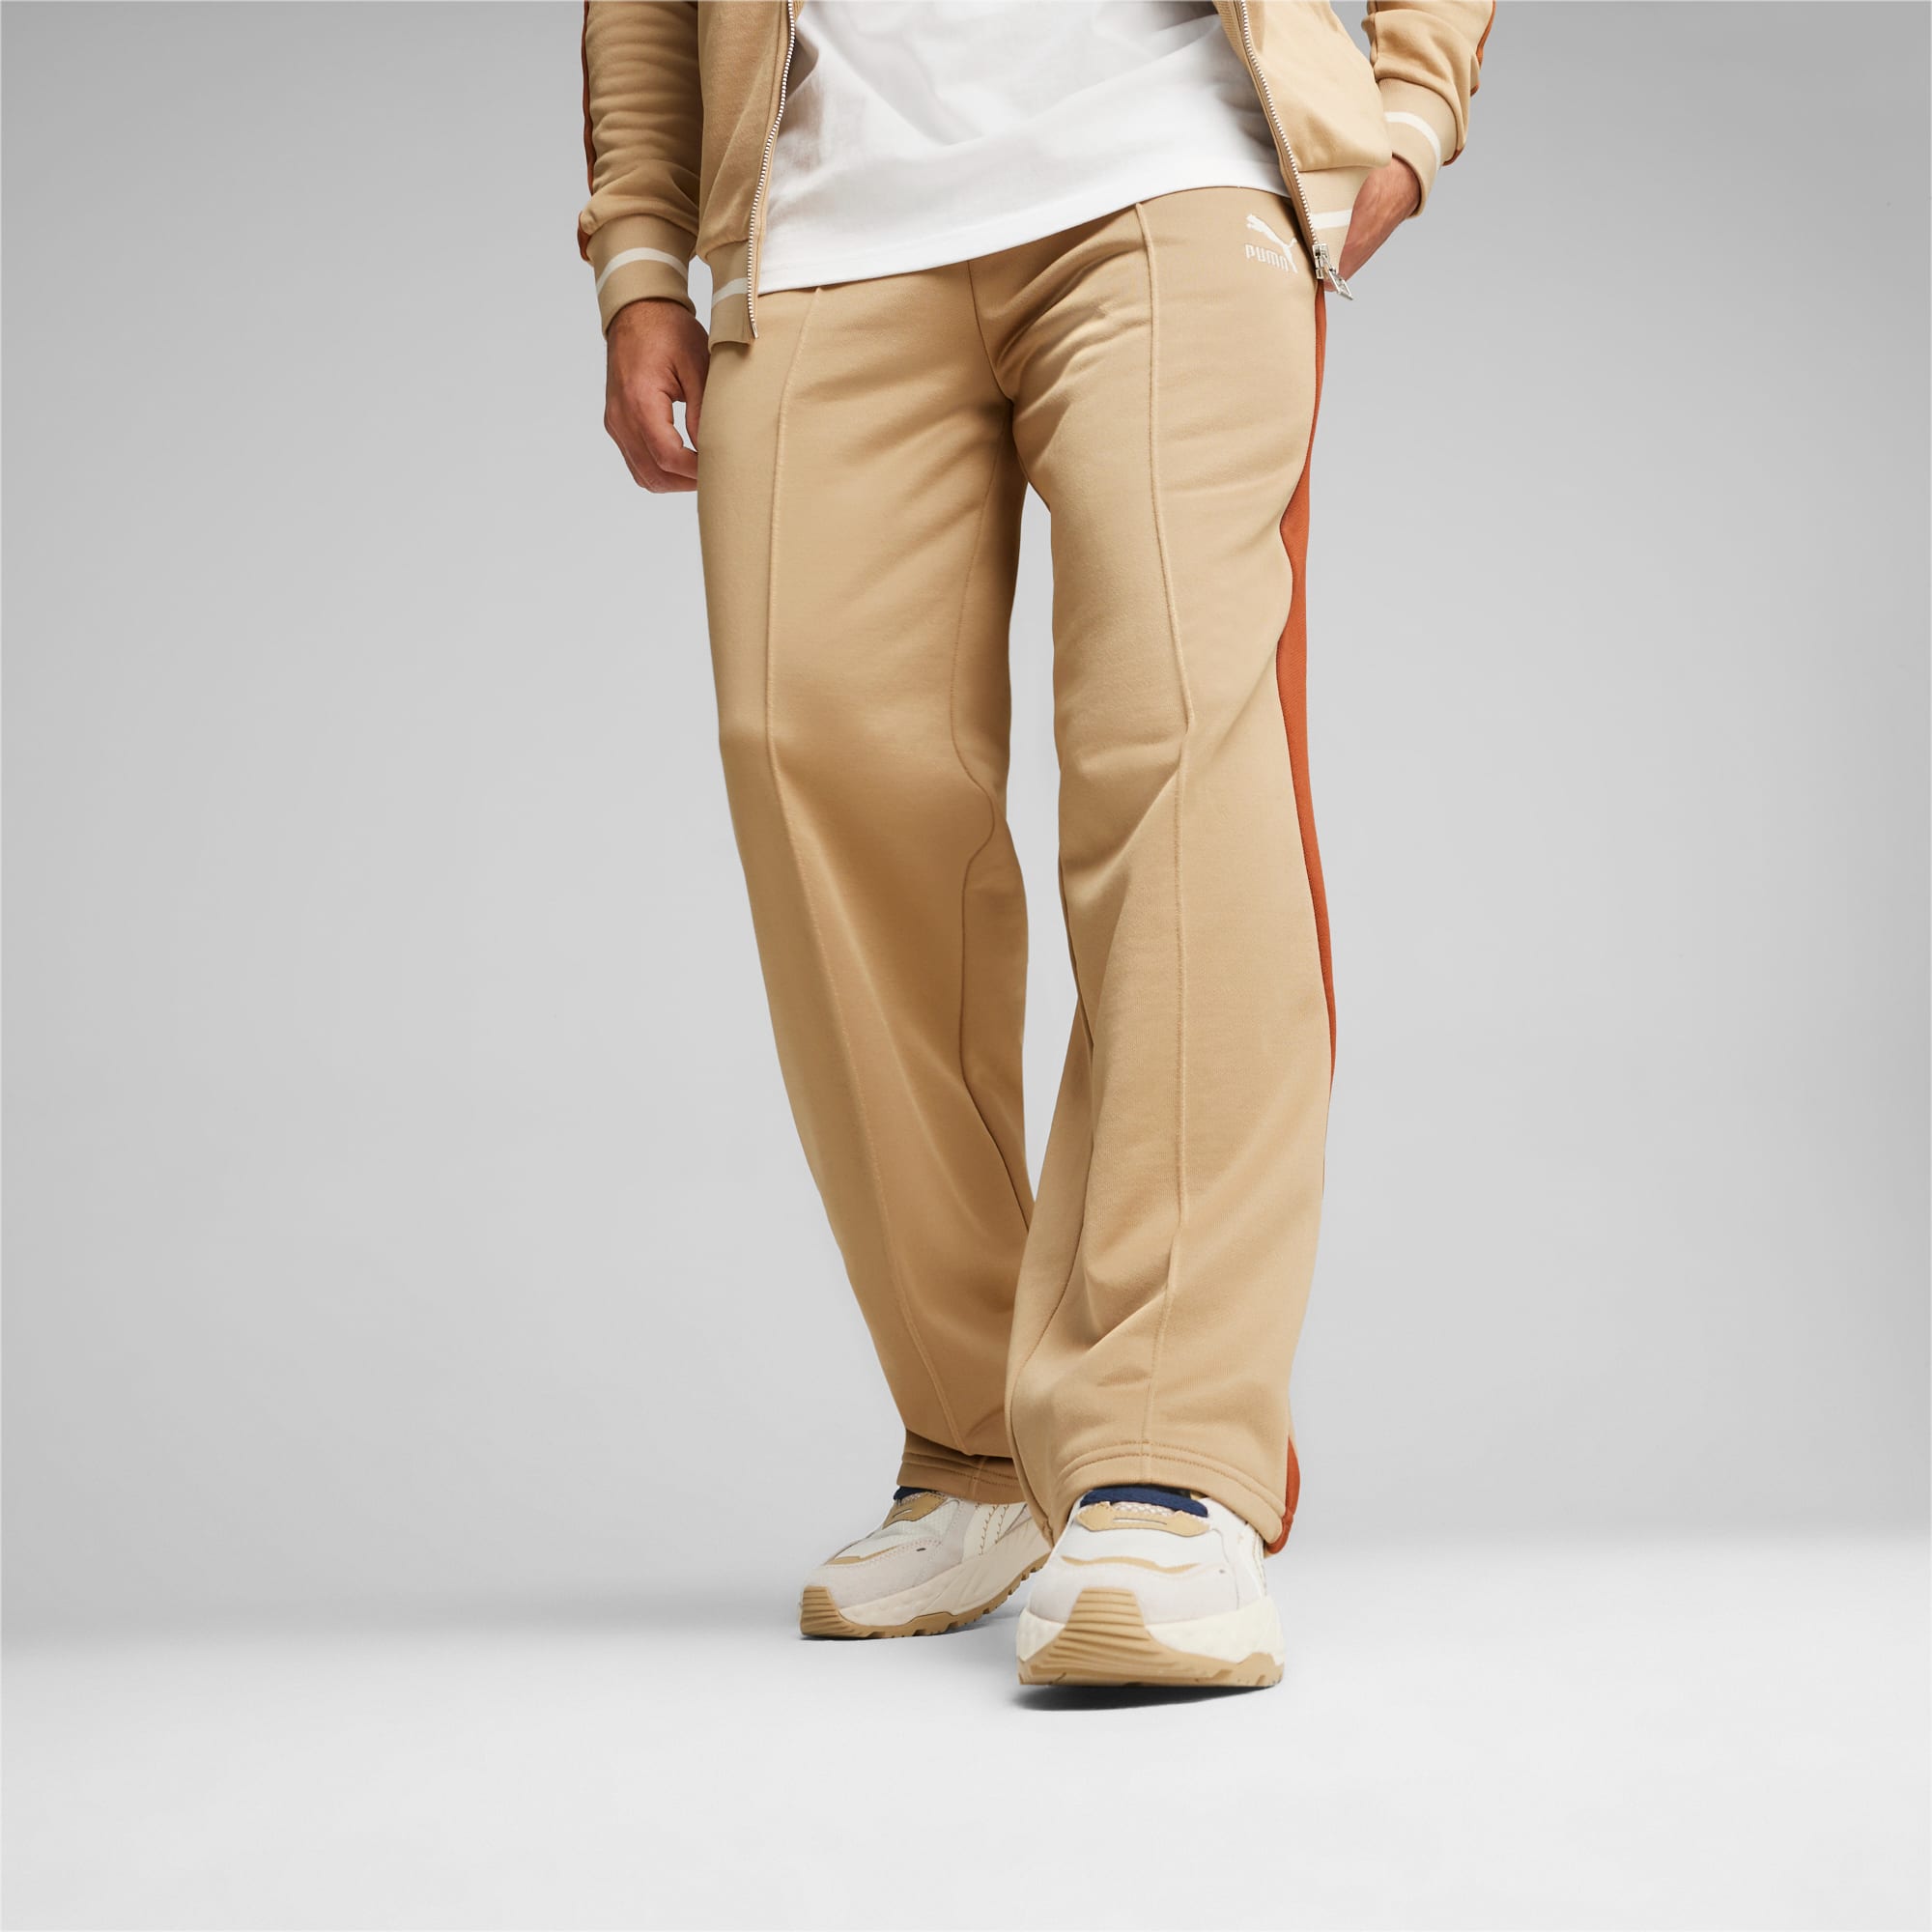 For the Fanbase T7 Men's Track Pants | PUMA